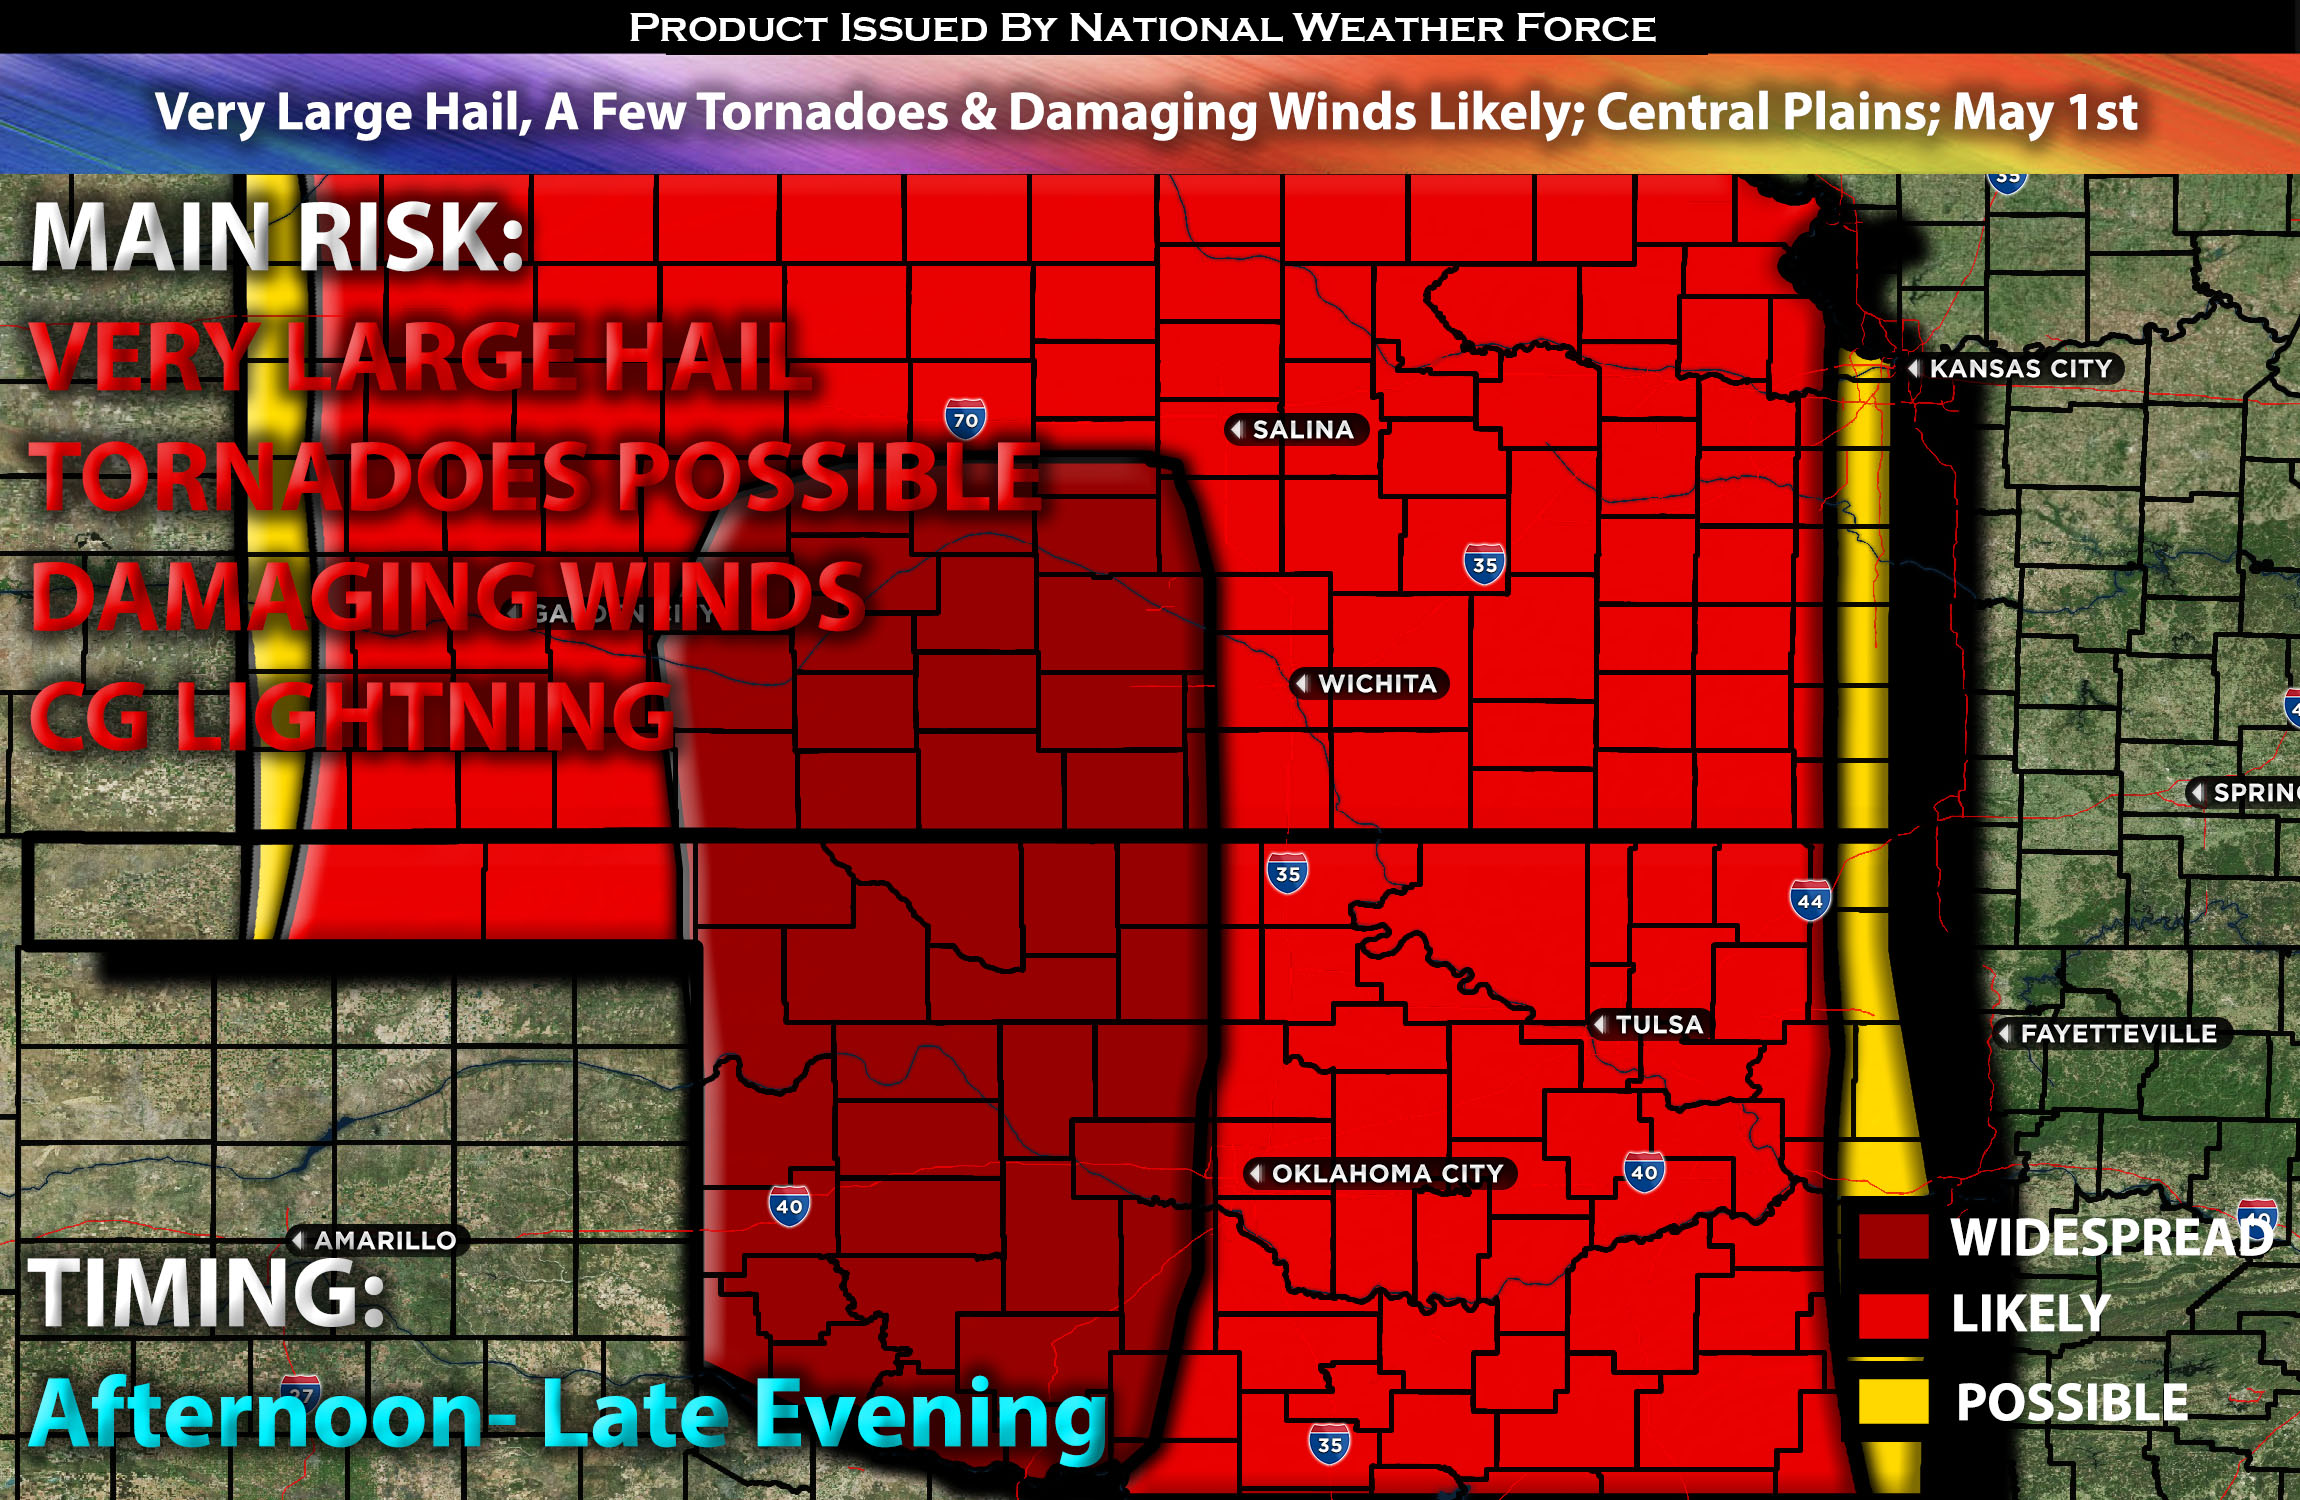 Very Large Hail, A Few Tornadoes & Damaging Winds Likely; Central Plains; May 1st